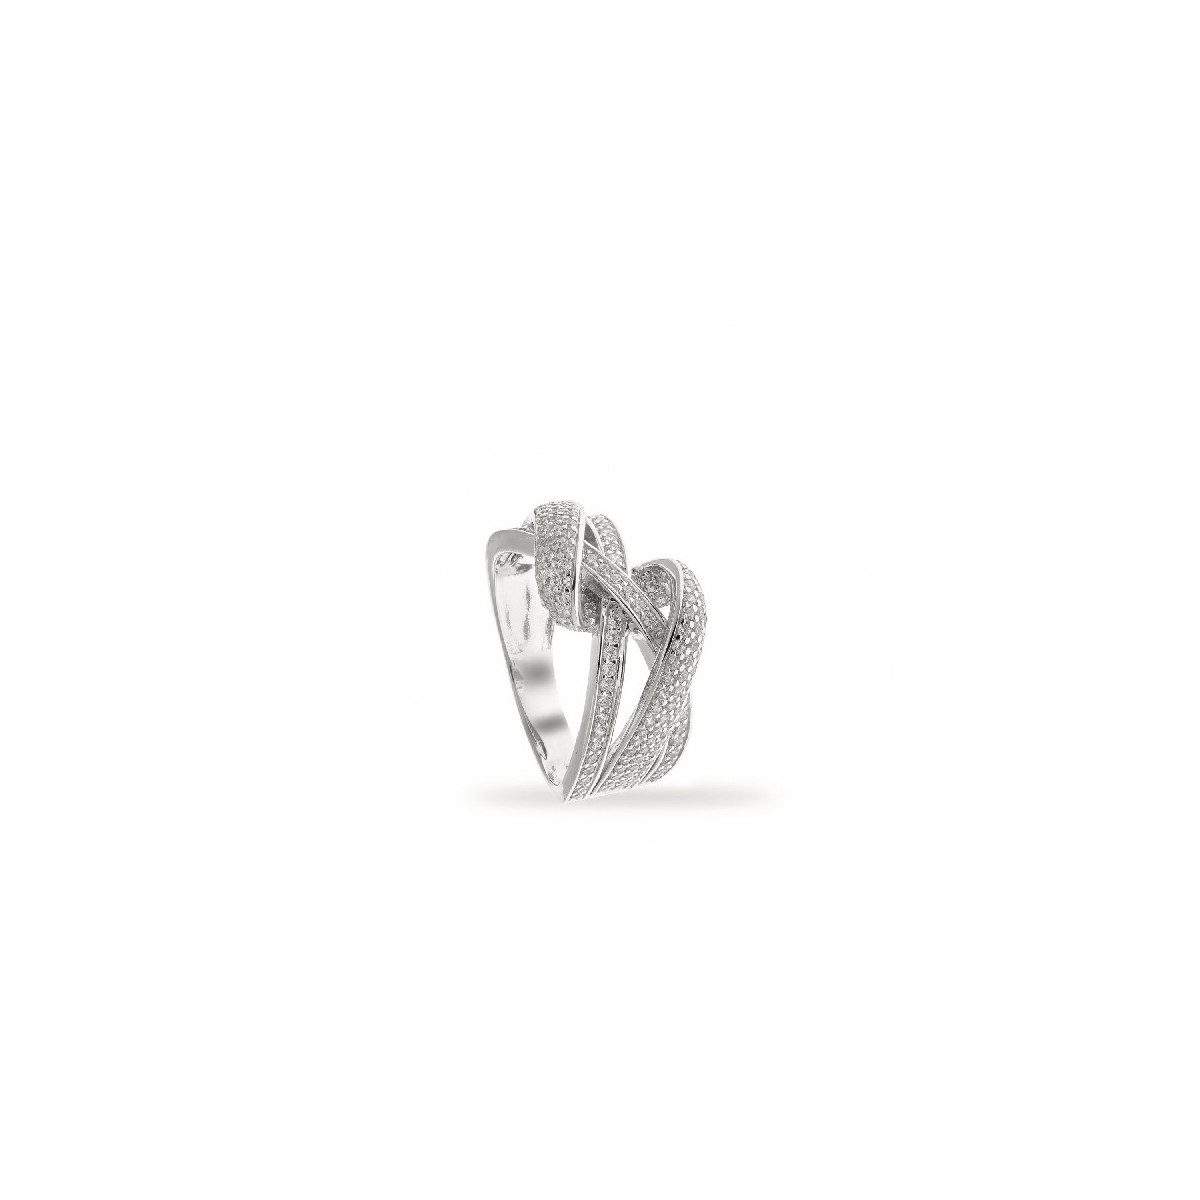 ANELL LINEARGENT - 18244-R